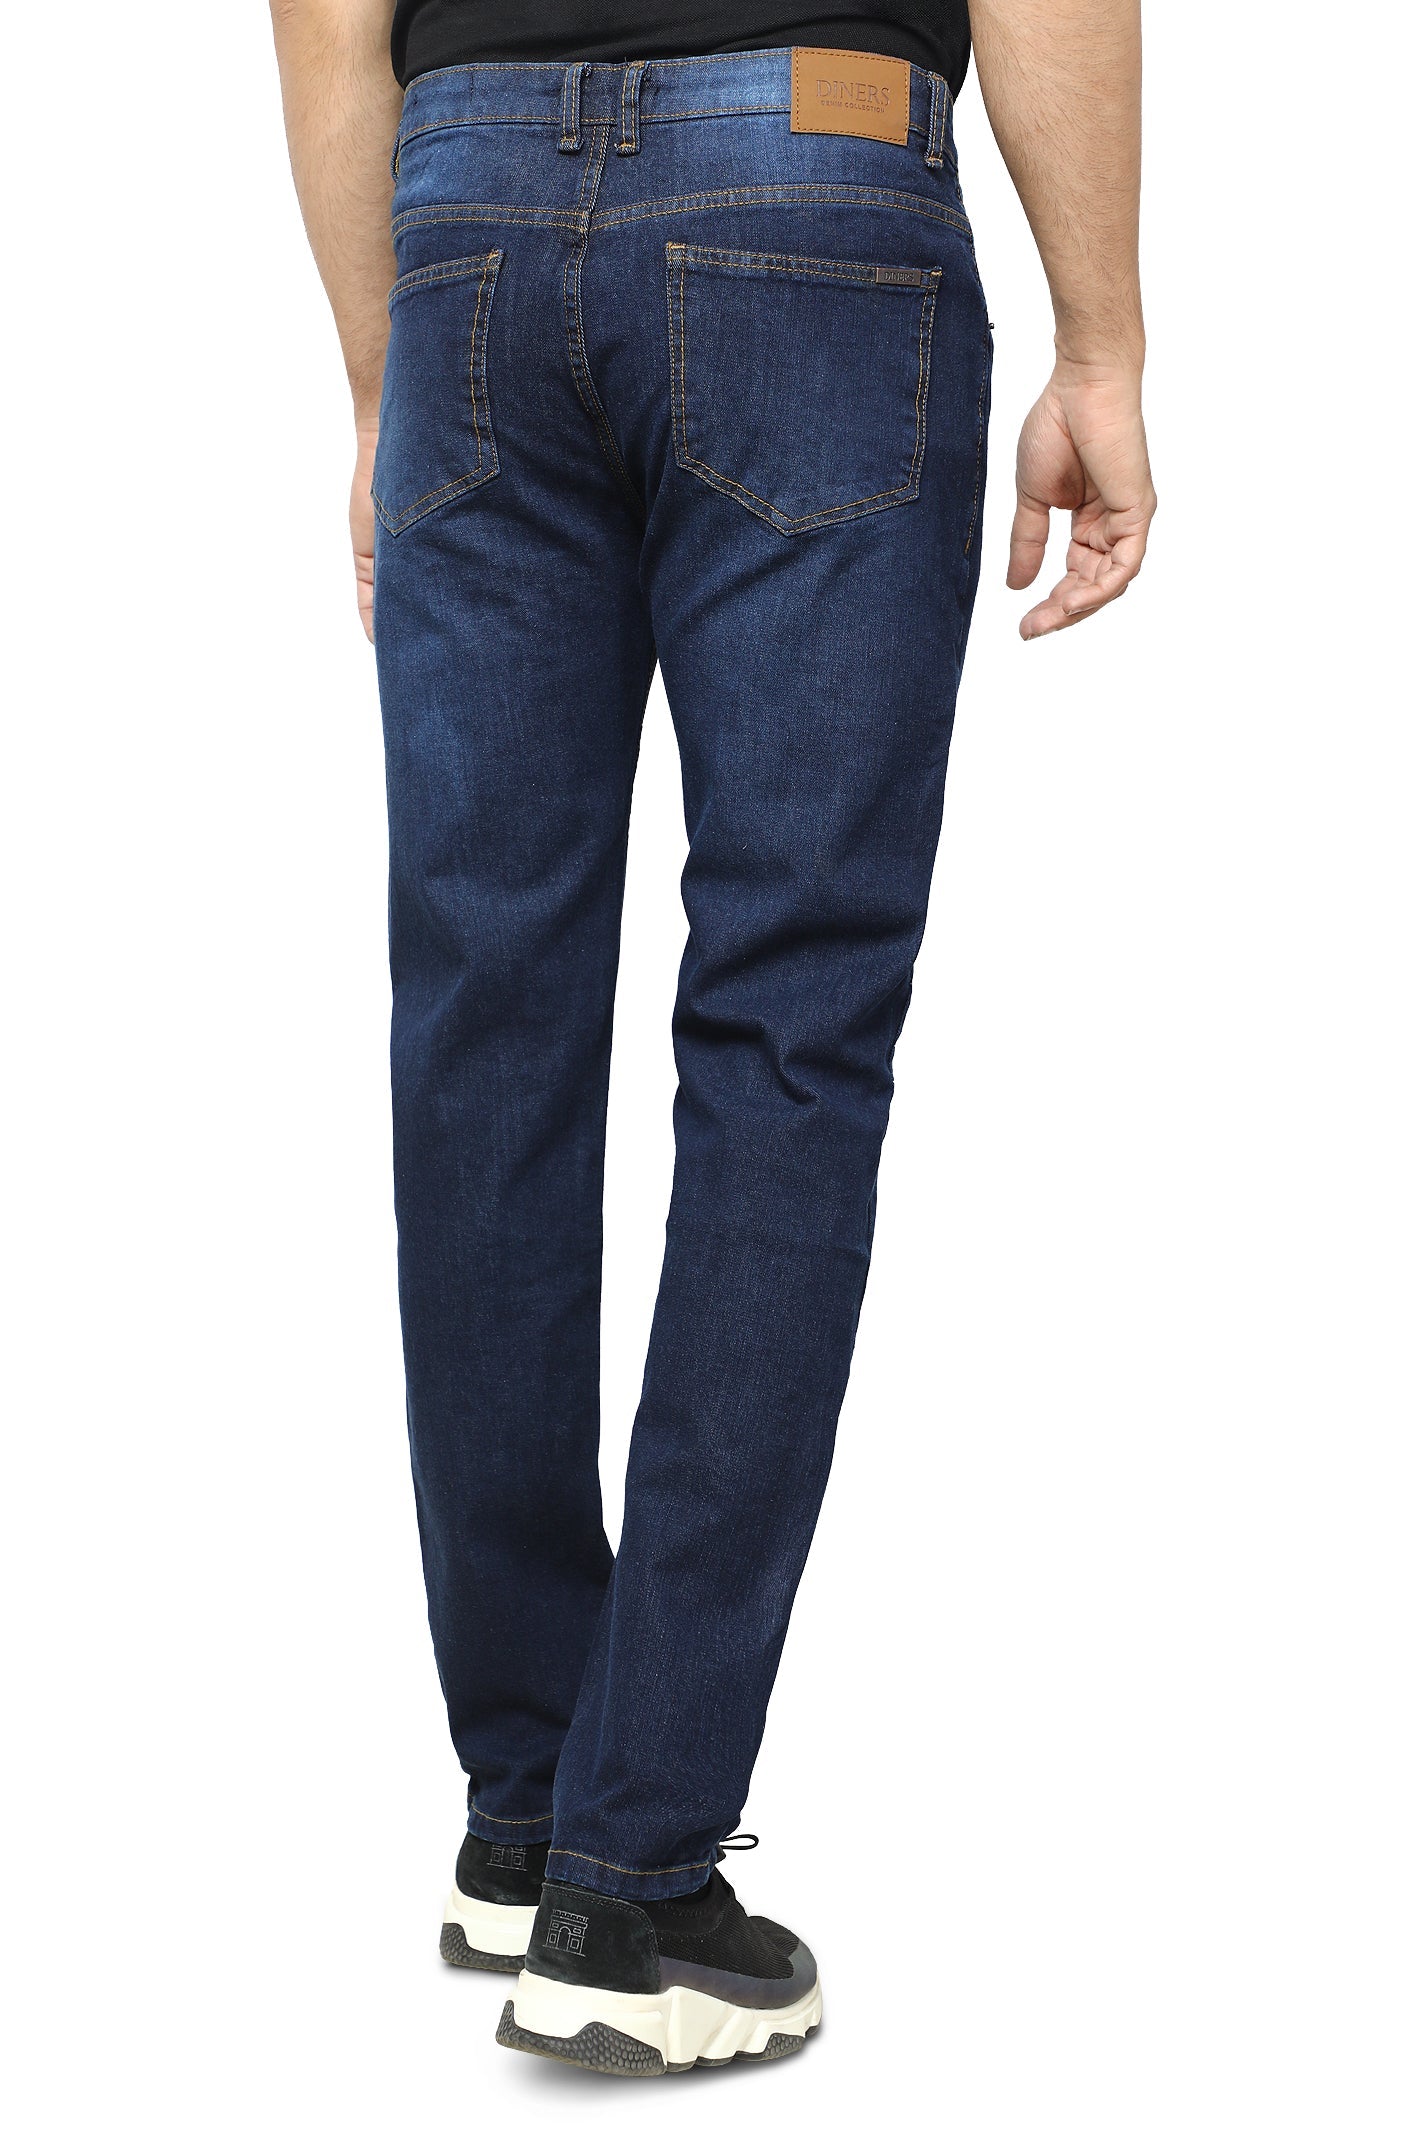 Casual Jeans SKU: BJ3100-D-BLUE - Diners